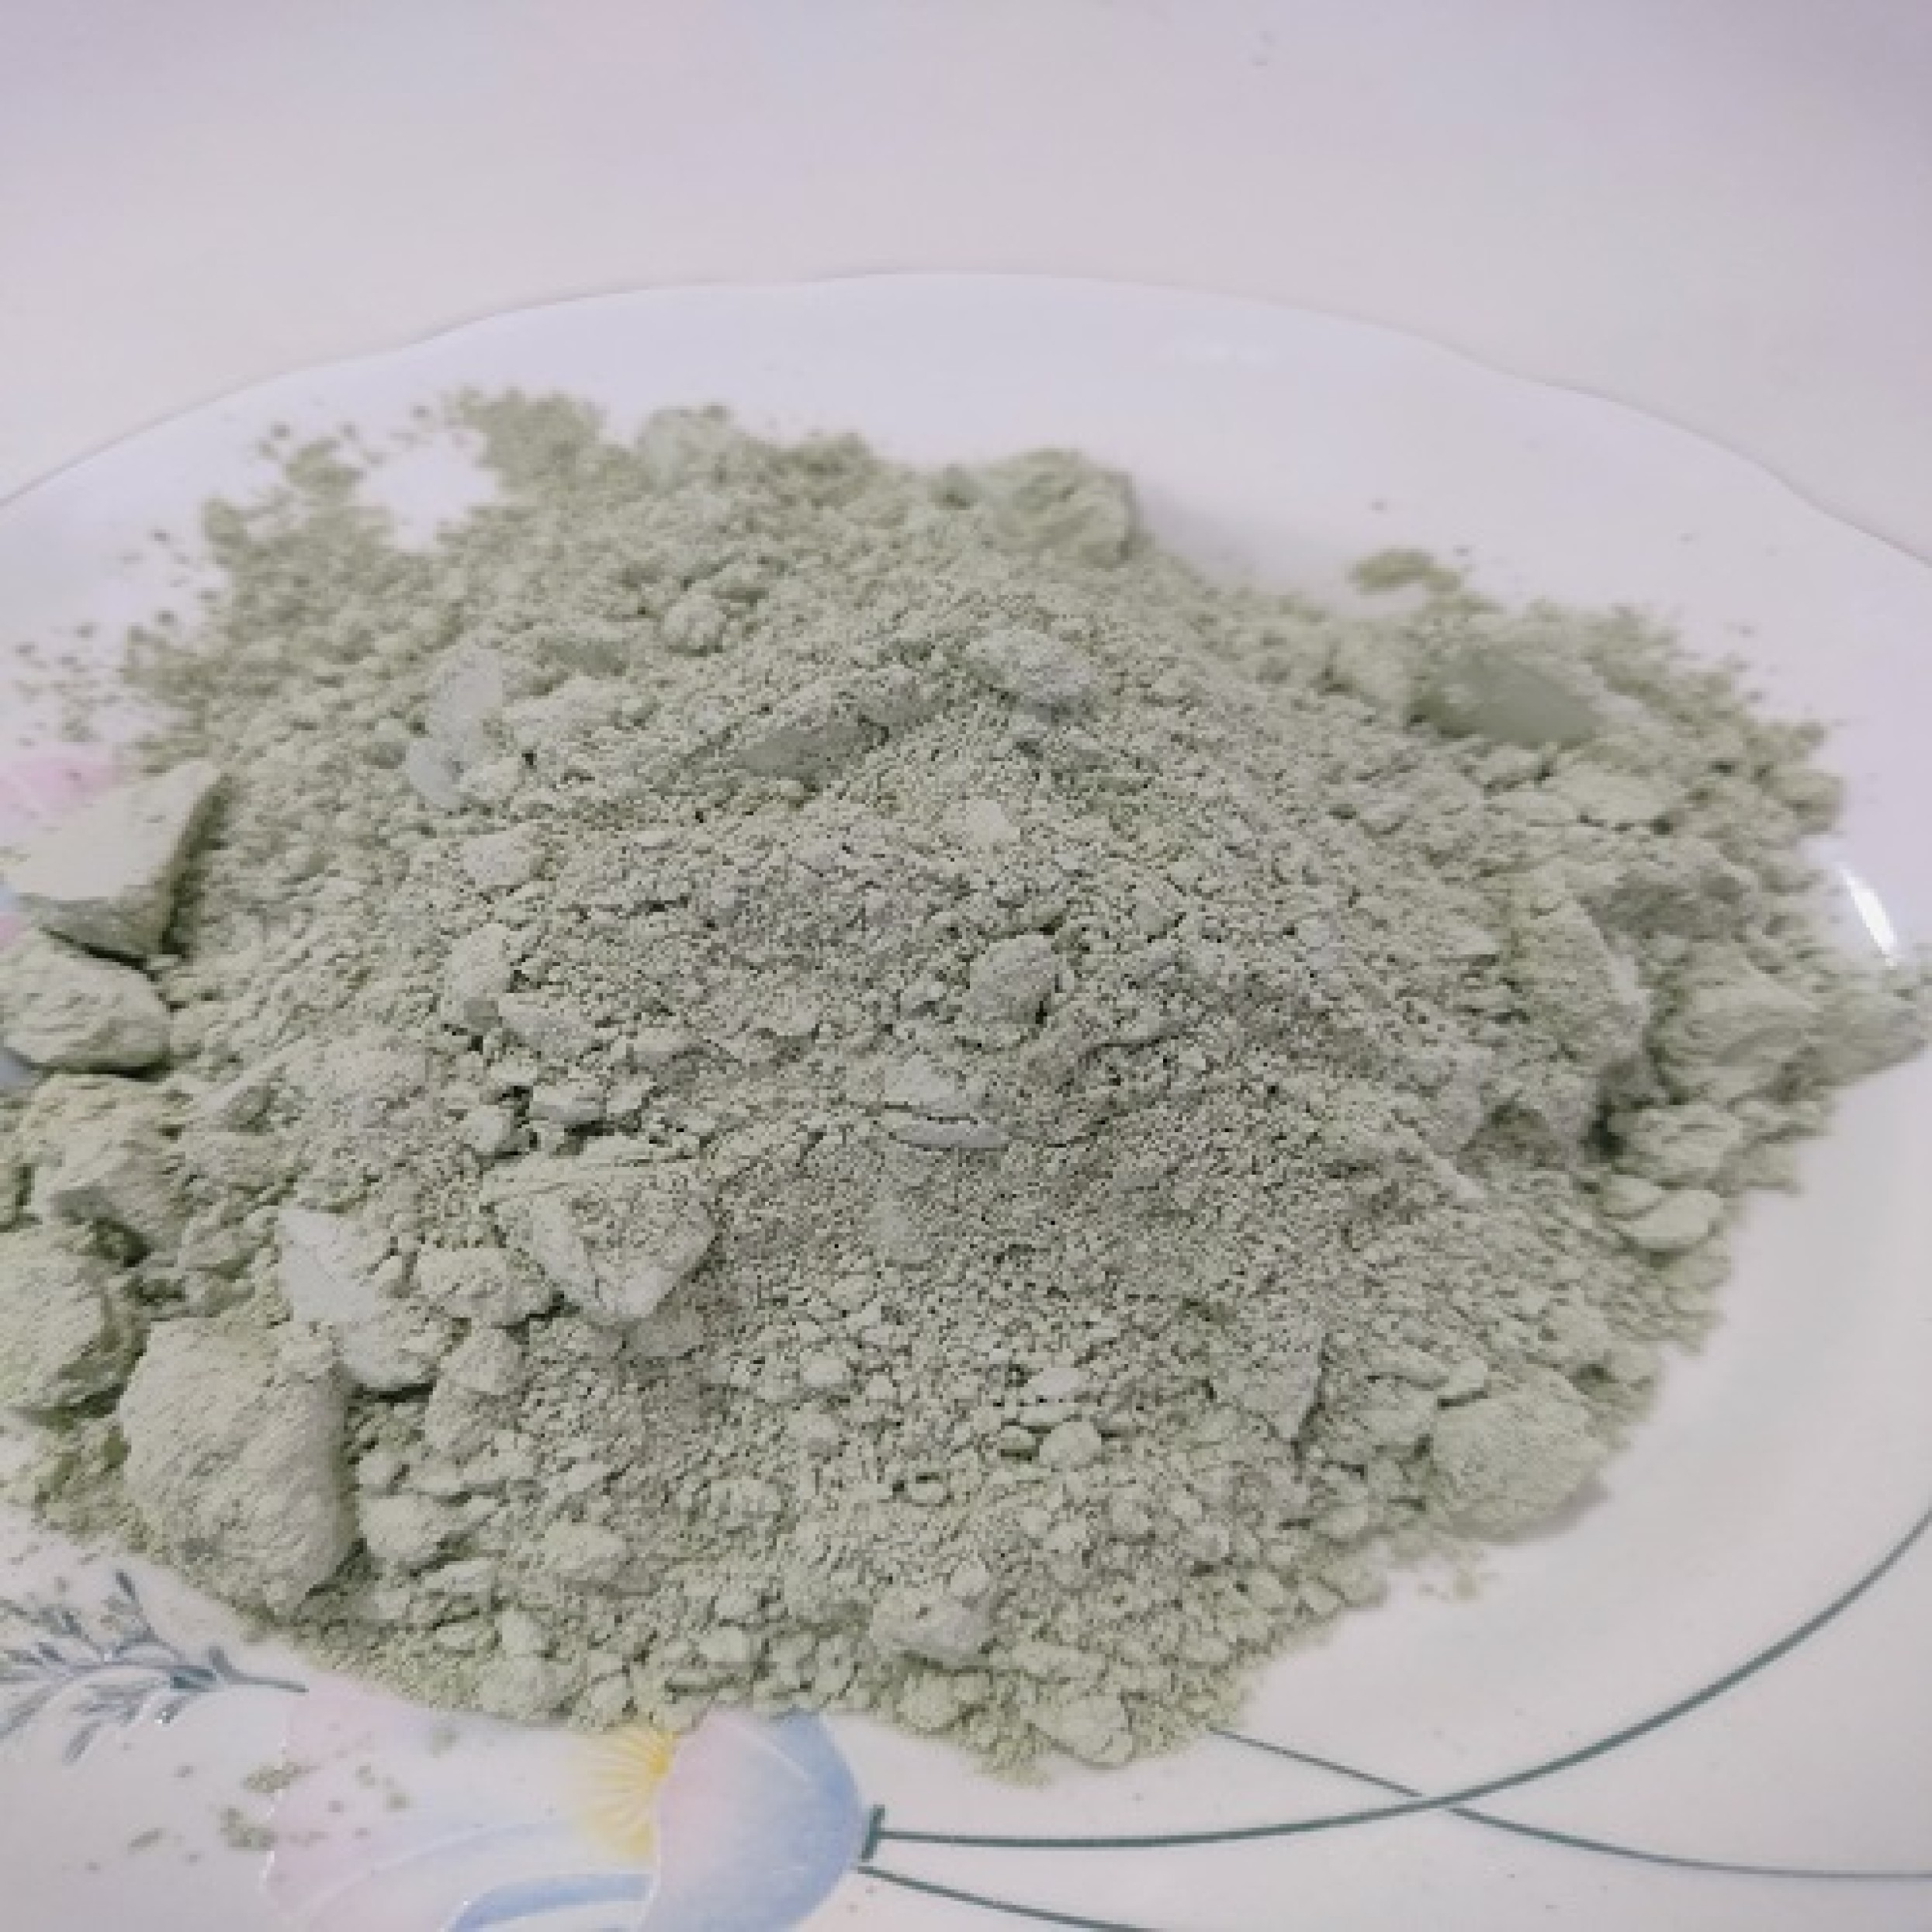 French Green Clay